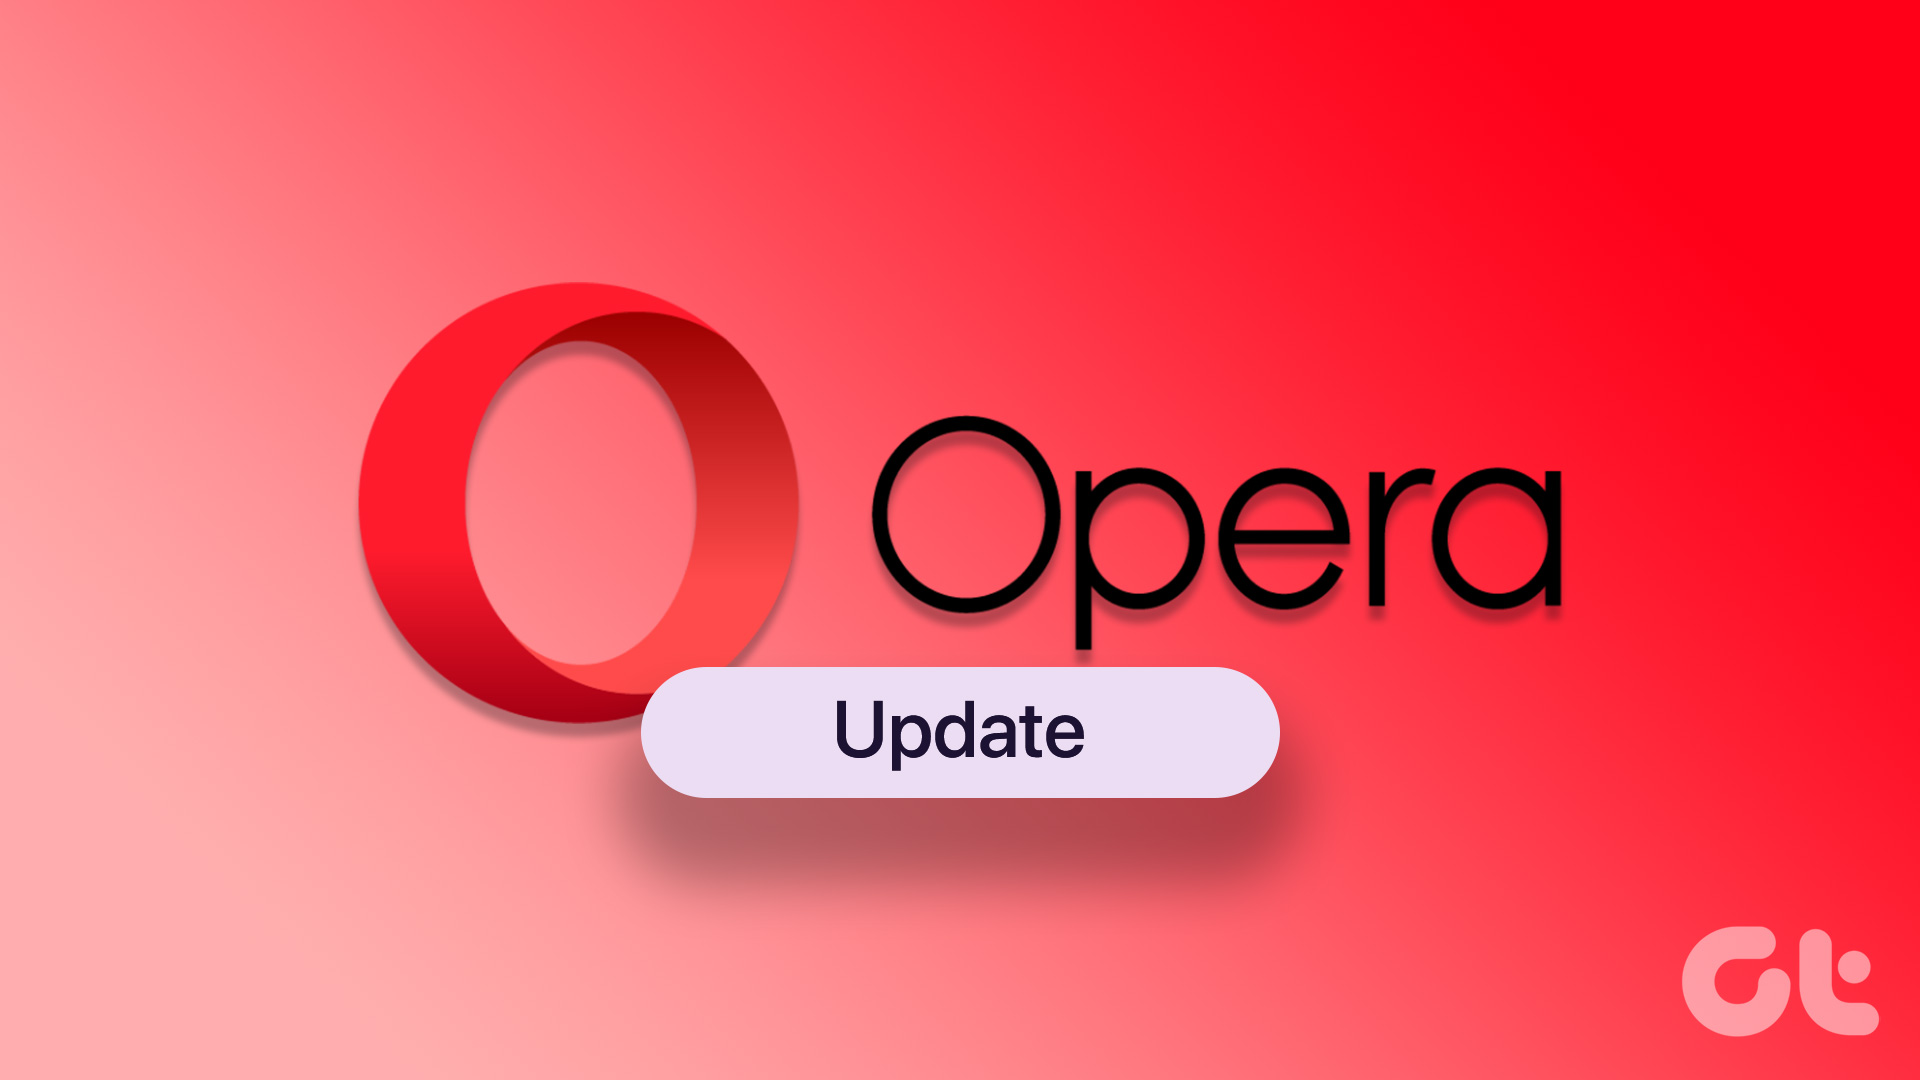 How to Update Opera on Desktop and Mobile